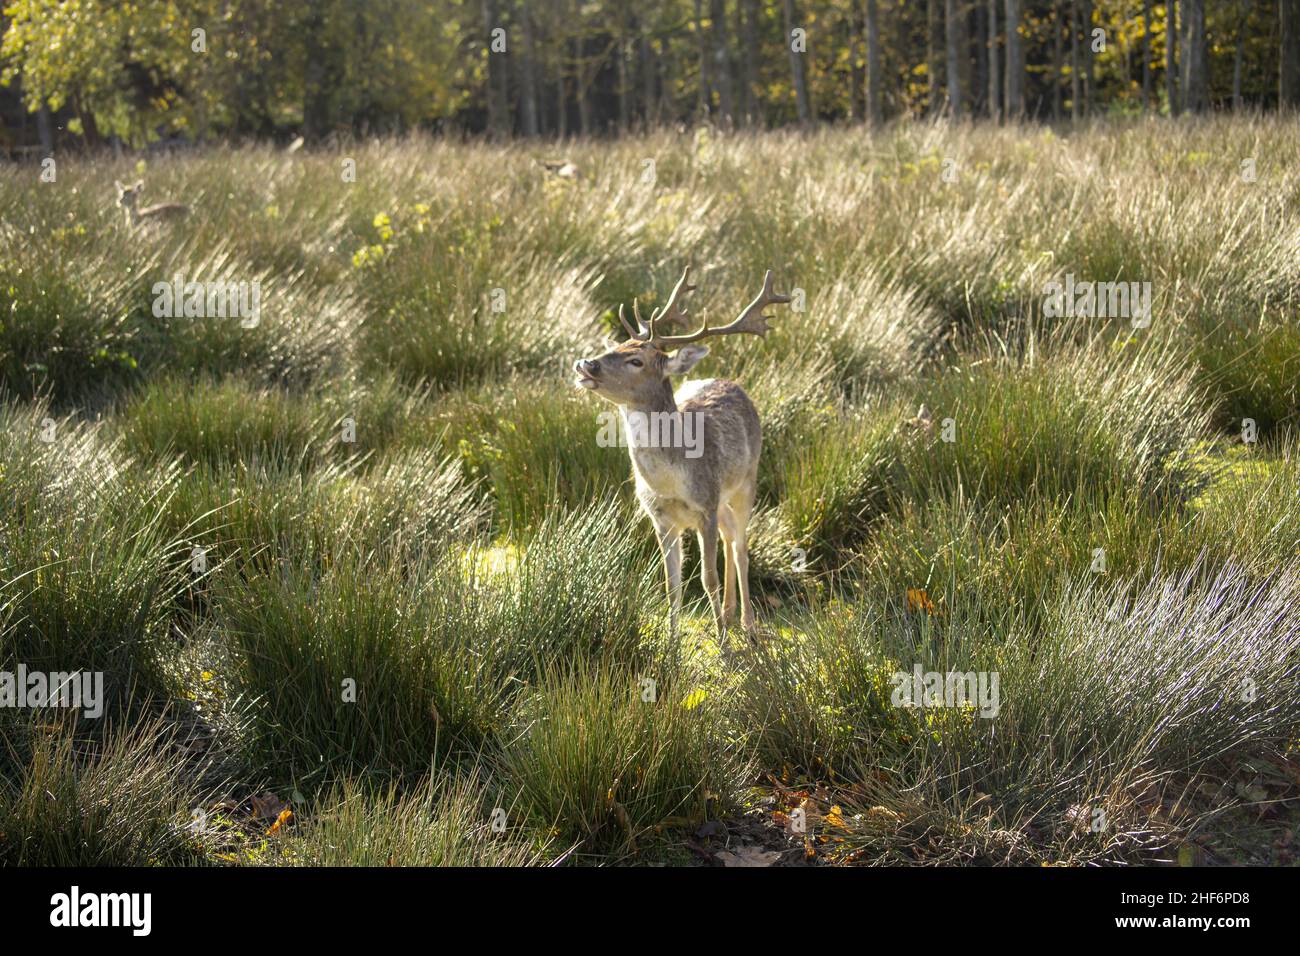 A cute deer is watching out at the cold fresh air in freedom at a high grassy meadow Stock Photo